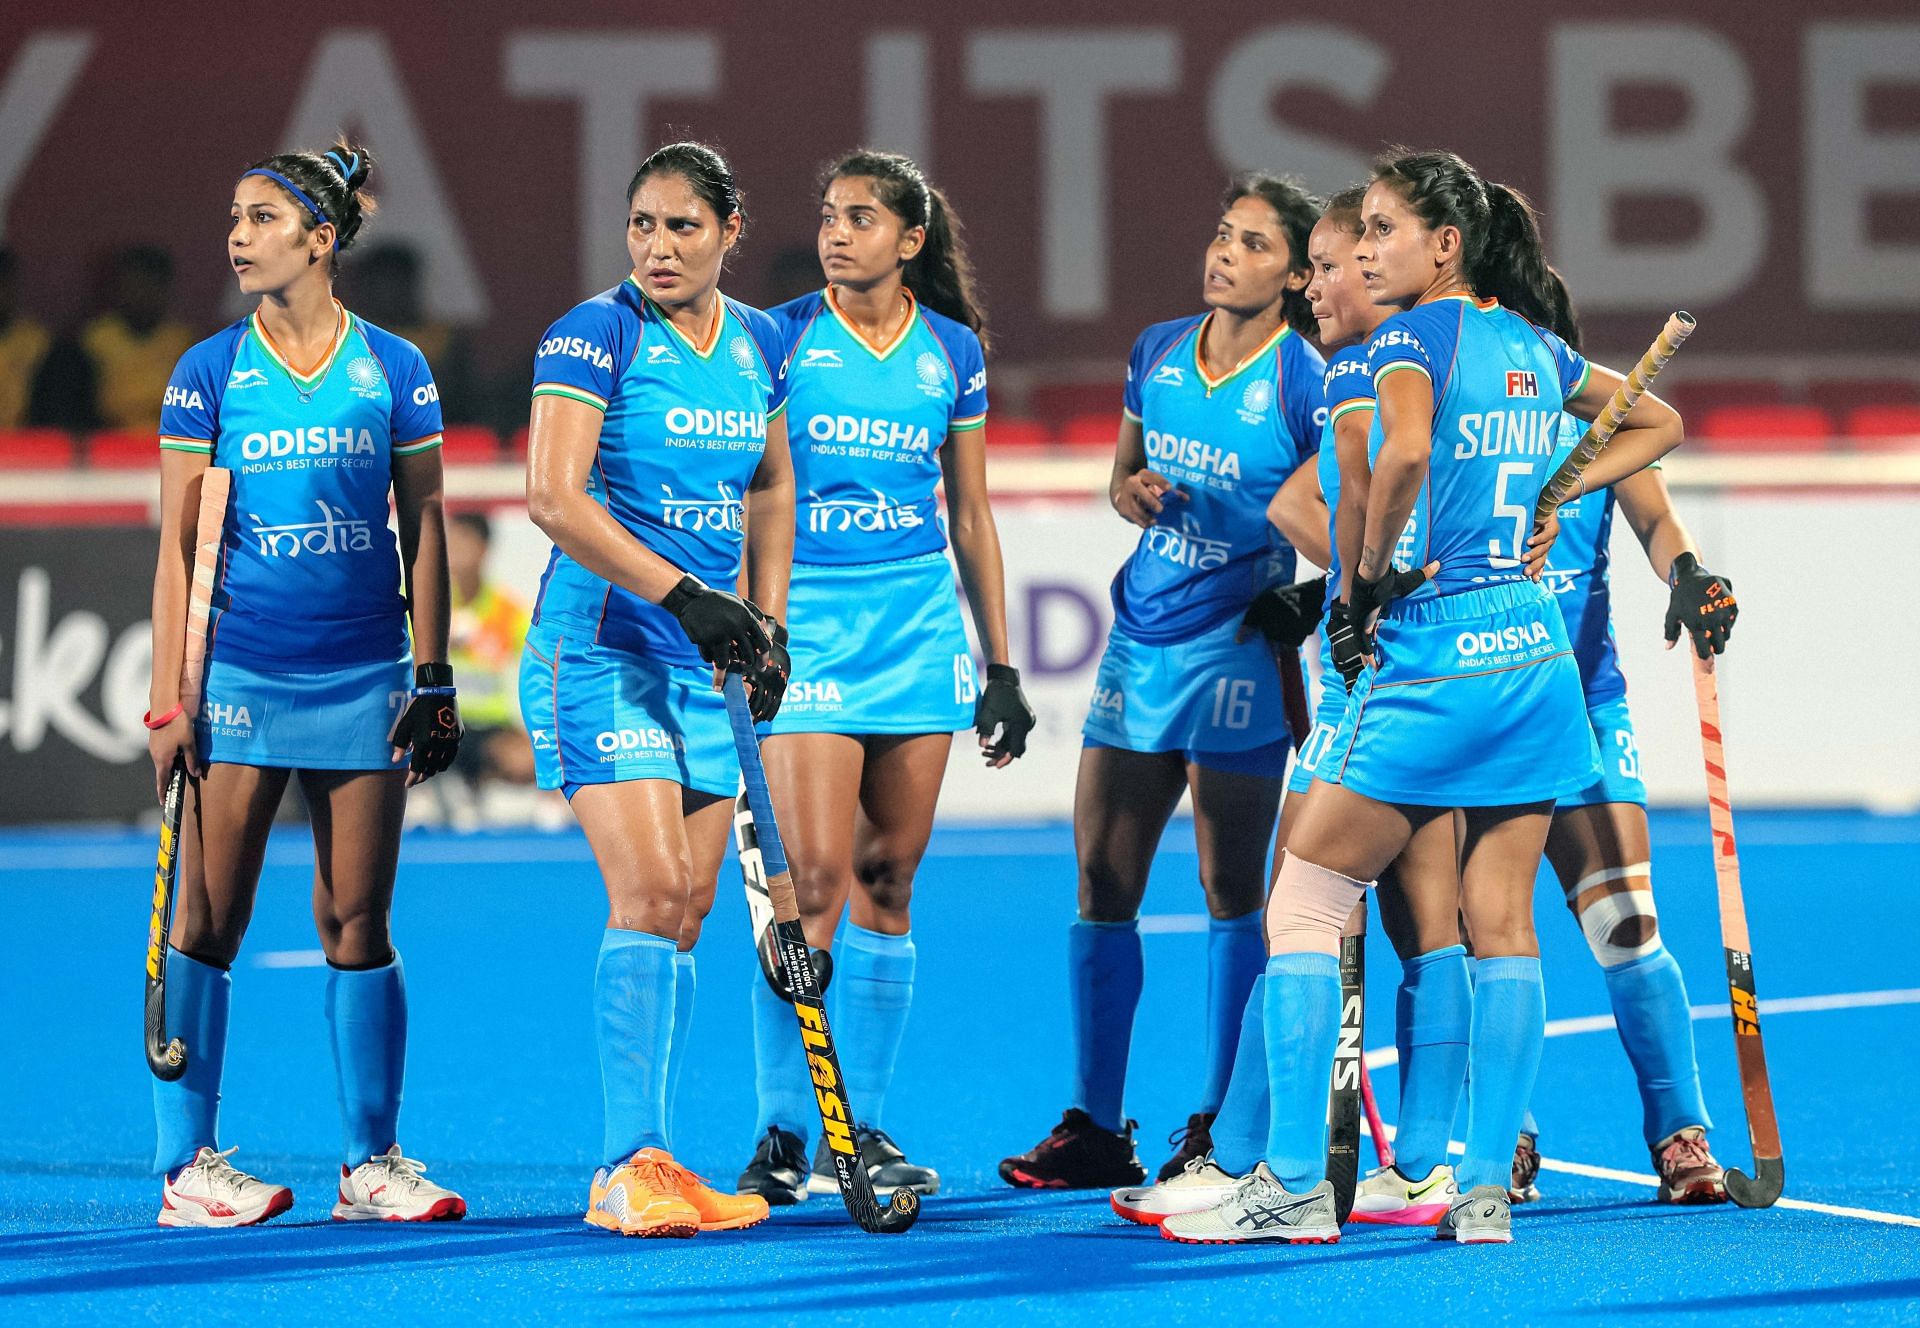 Indian team suffered a 2-1 loss to China in their opening Pro League match for the season 